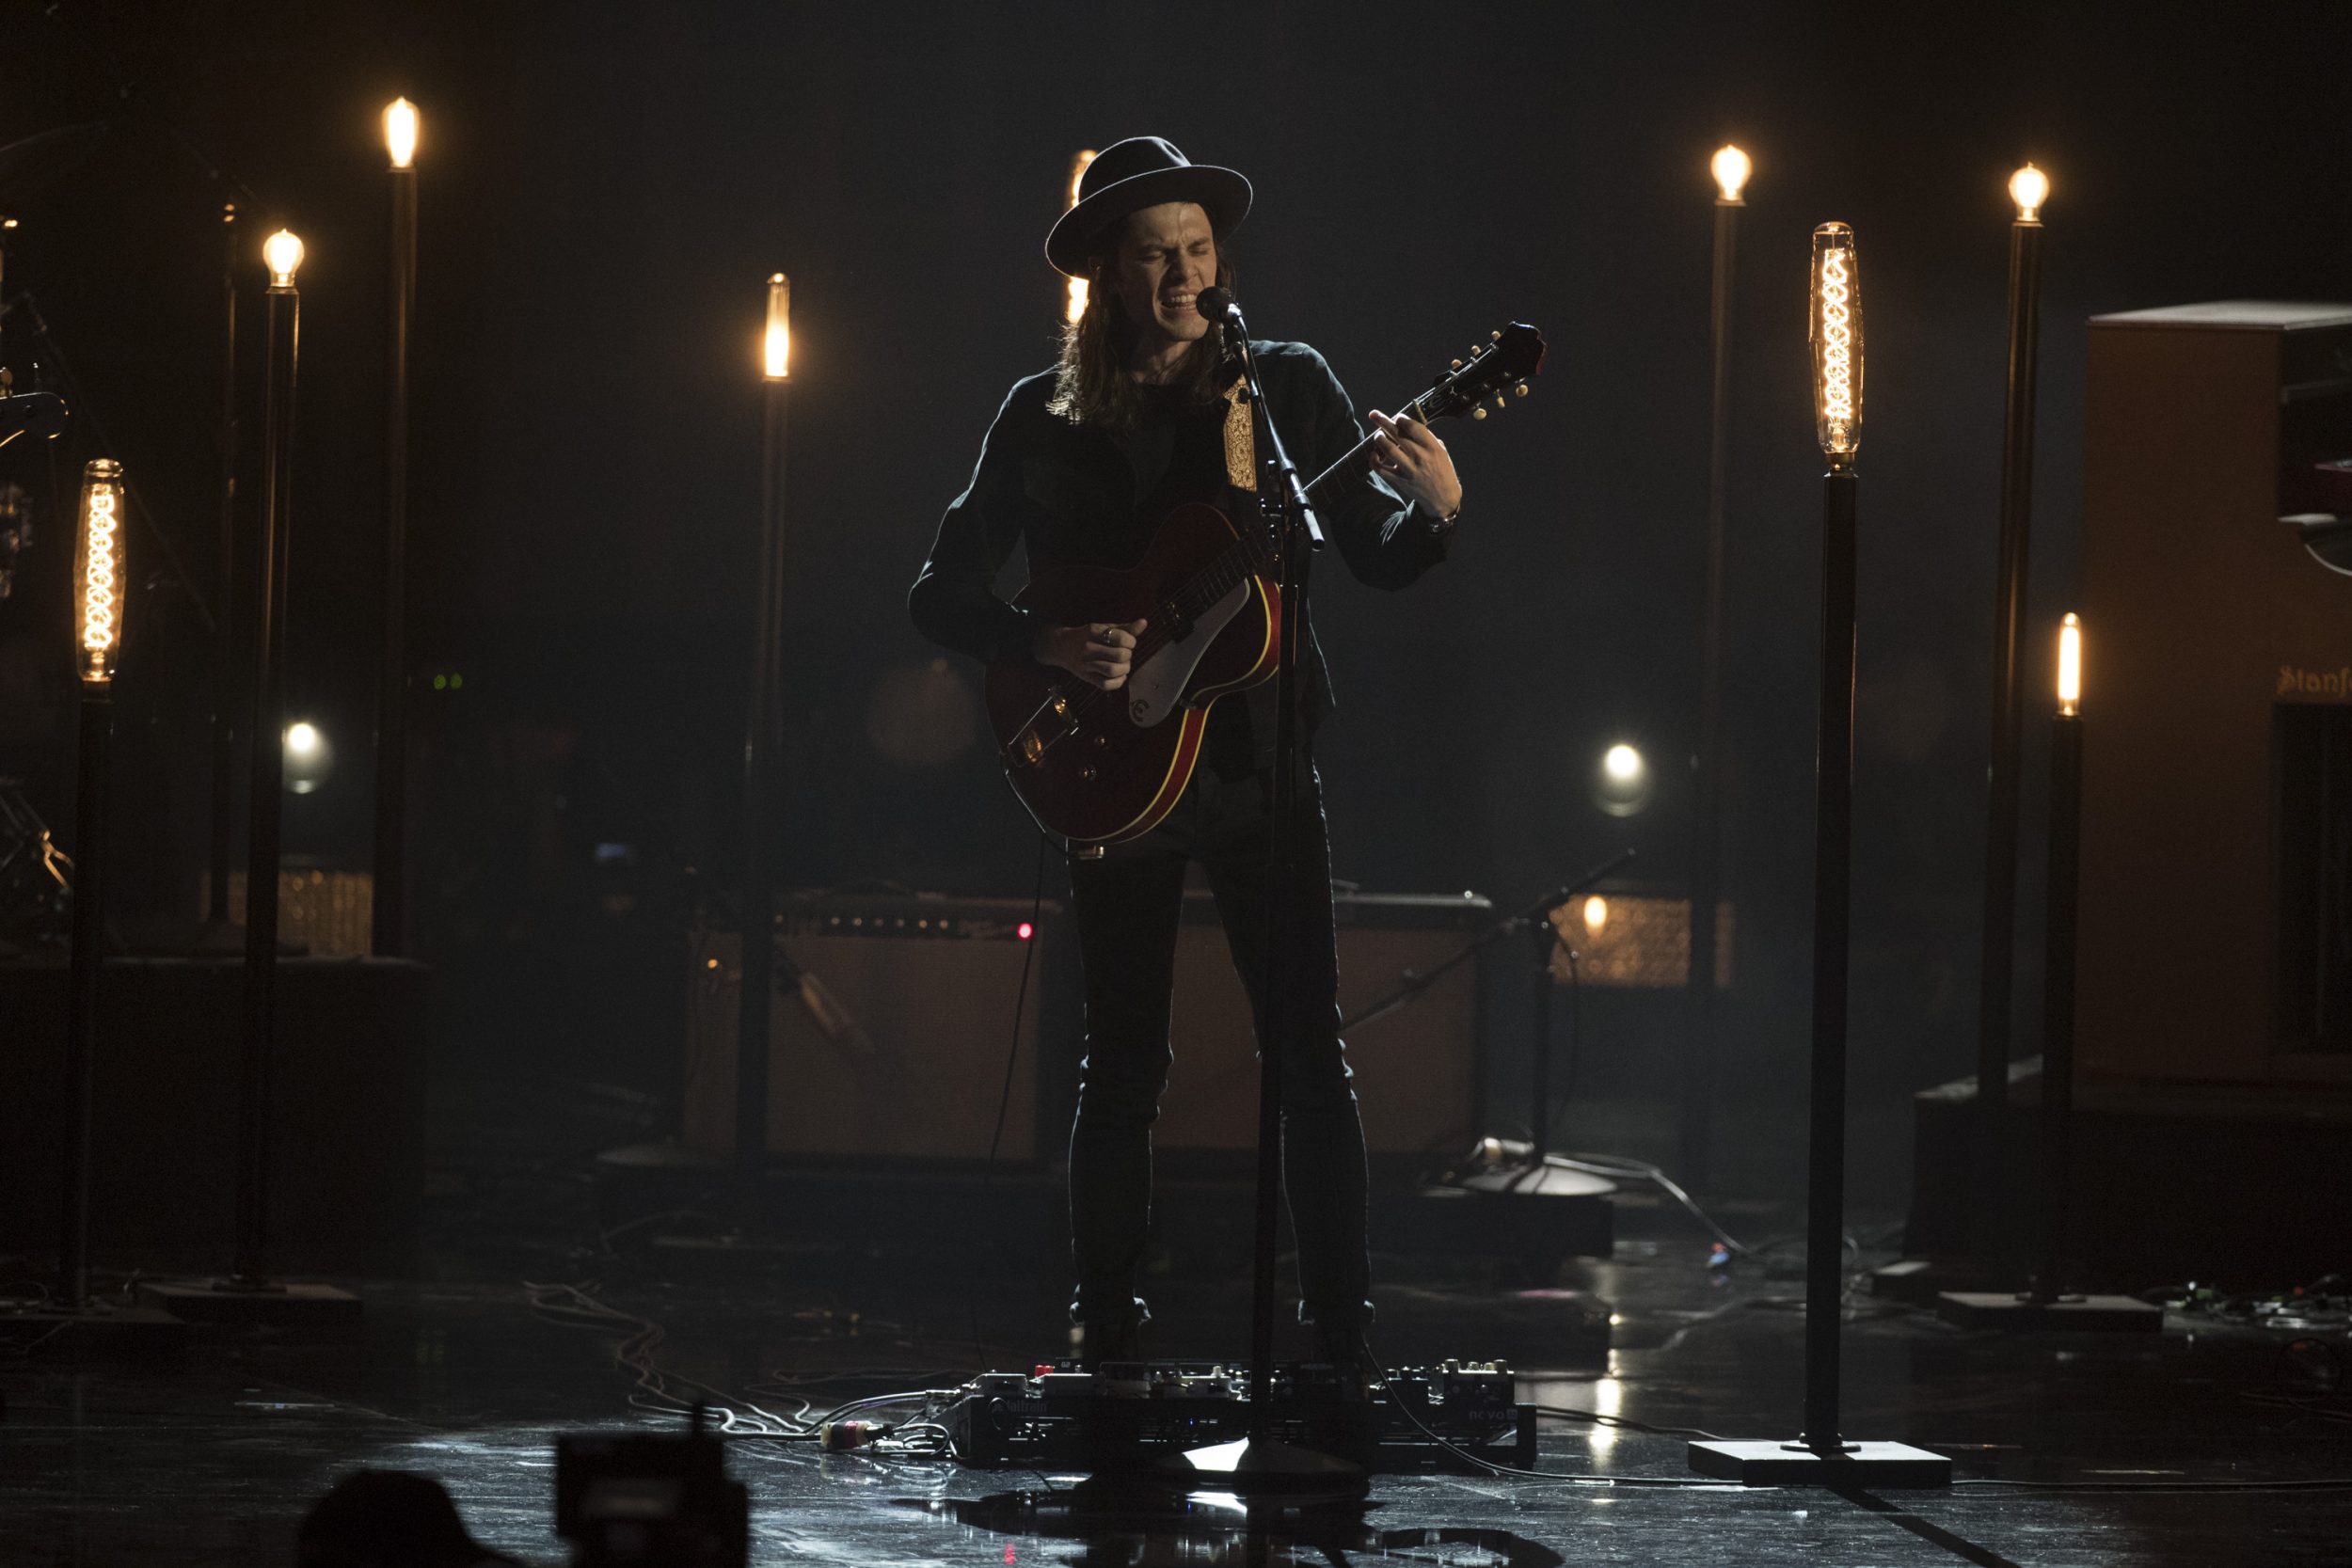 THE 2016 AMERICAN MUSIC AWARDS(r) - The “2016 American Music Awards,” the world’s biggest fan-voted award show, broadcasts live from the Microsoft Theater in Los Angeles on SUNDAY, NOVEMBER 20, at 8:00 p.m. EST, on ABC. (Image Group LA/ABC) JAMES BAY